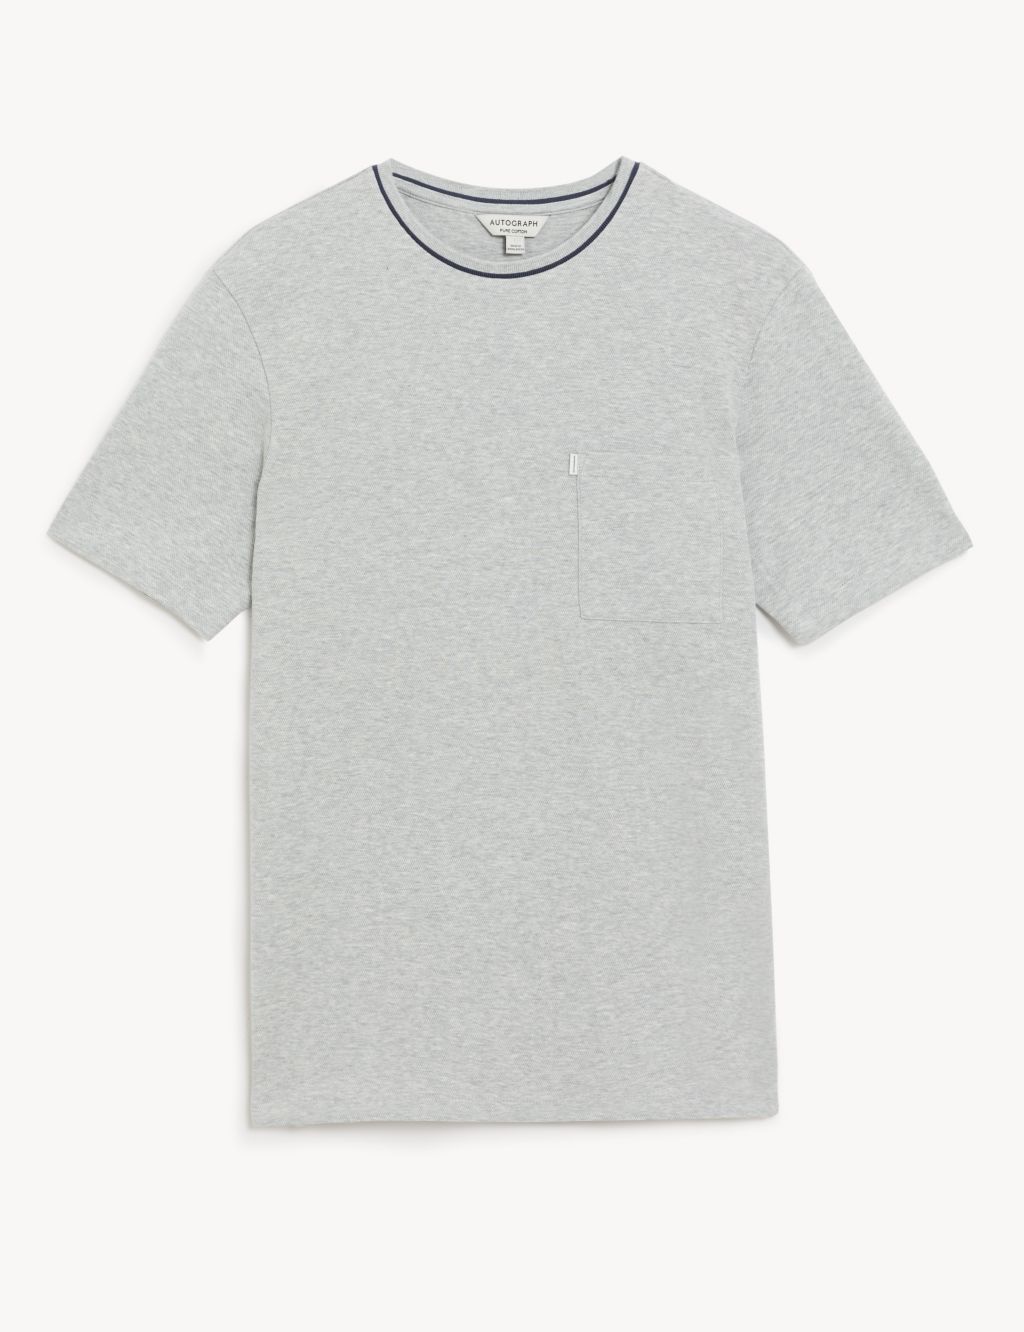 Pure Cotton Textured T-Shirt image 2